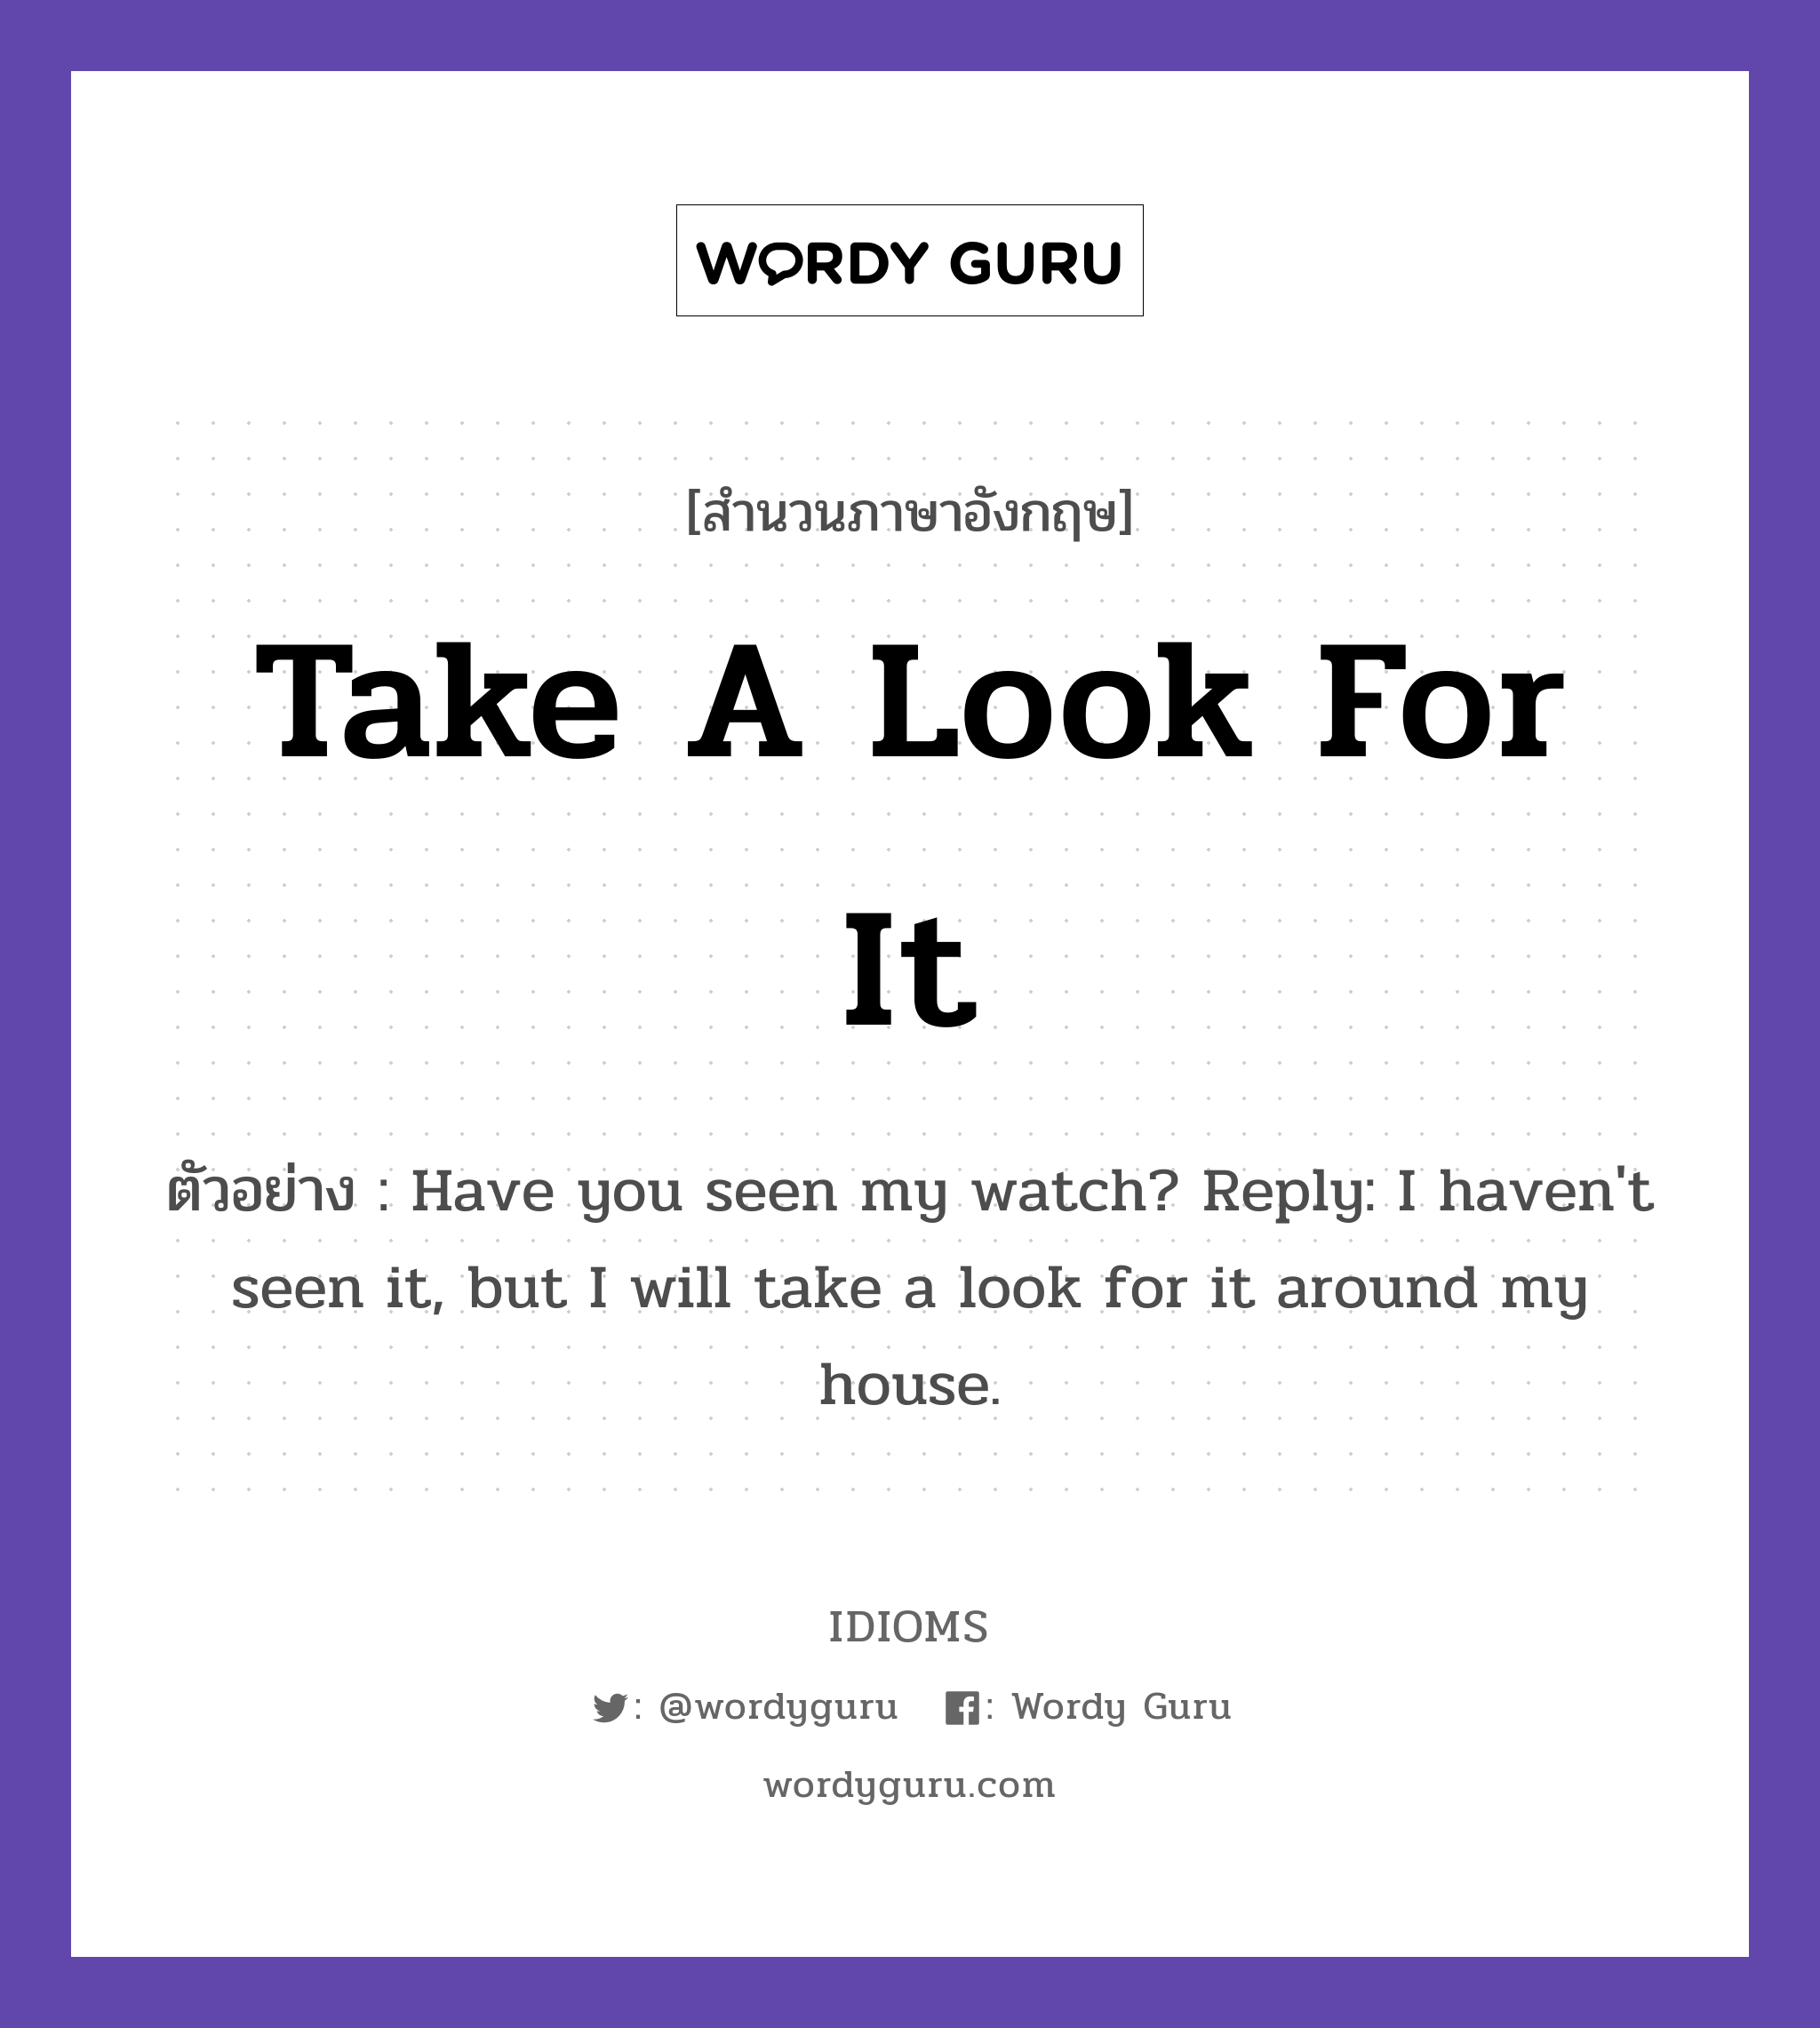 Take A Look For It แปลว่า?, สำนวนภาษาอังกฤษ Take A Look For It ตัวอย่าง Have you seen my watch? Reply: I haven't seen it, but I will take a look for it around my house.